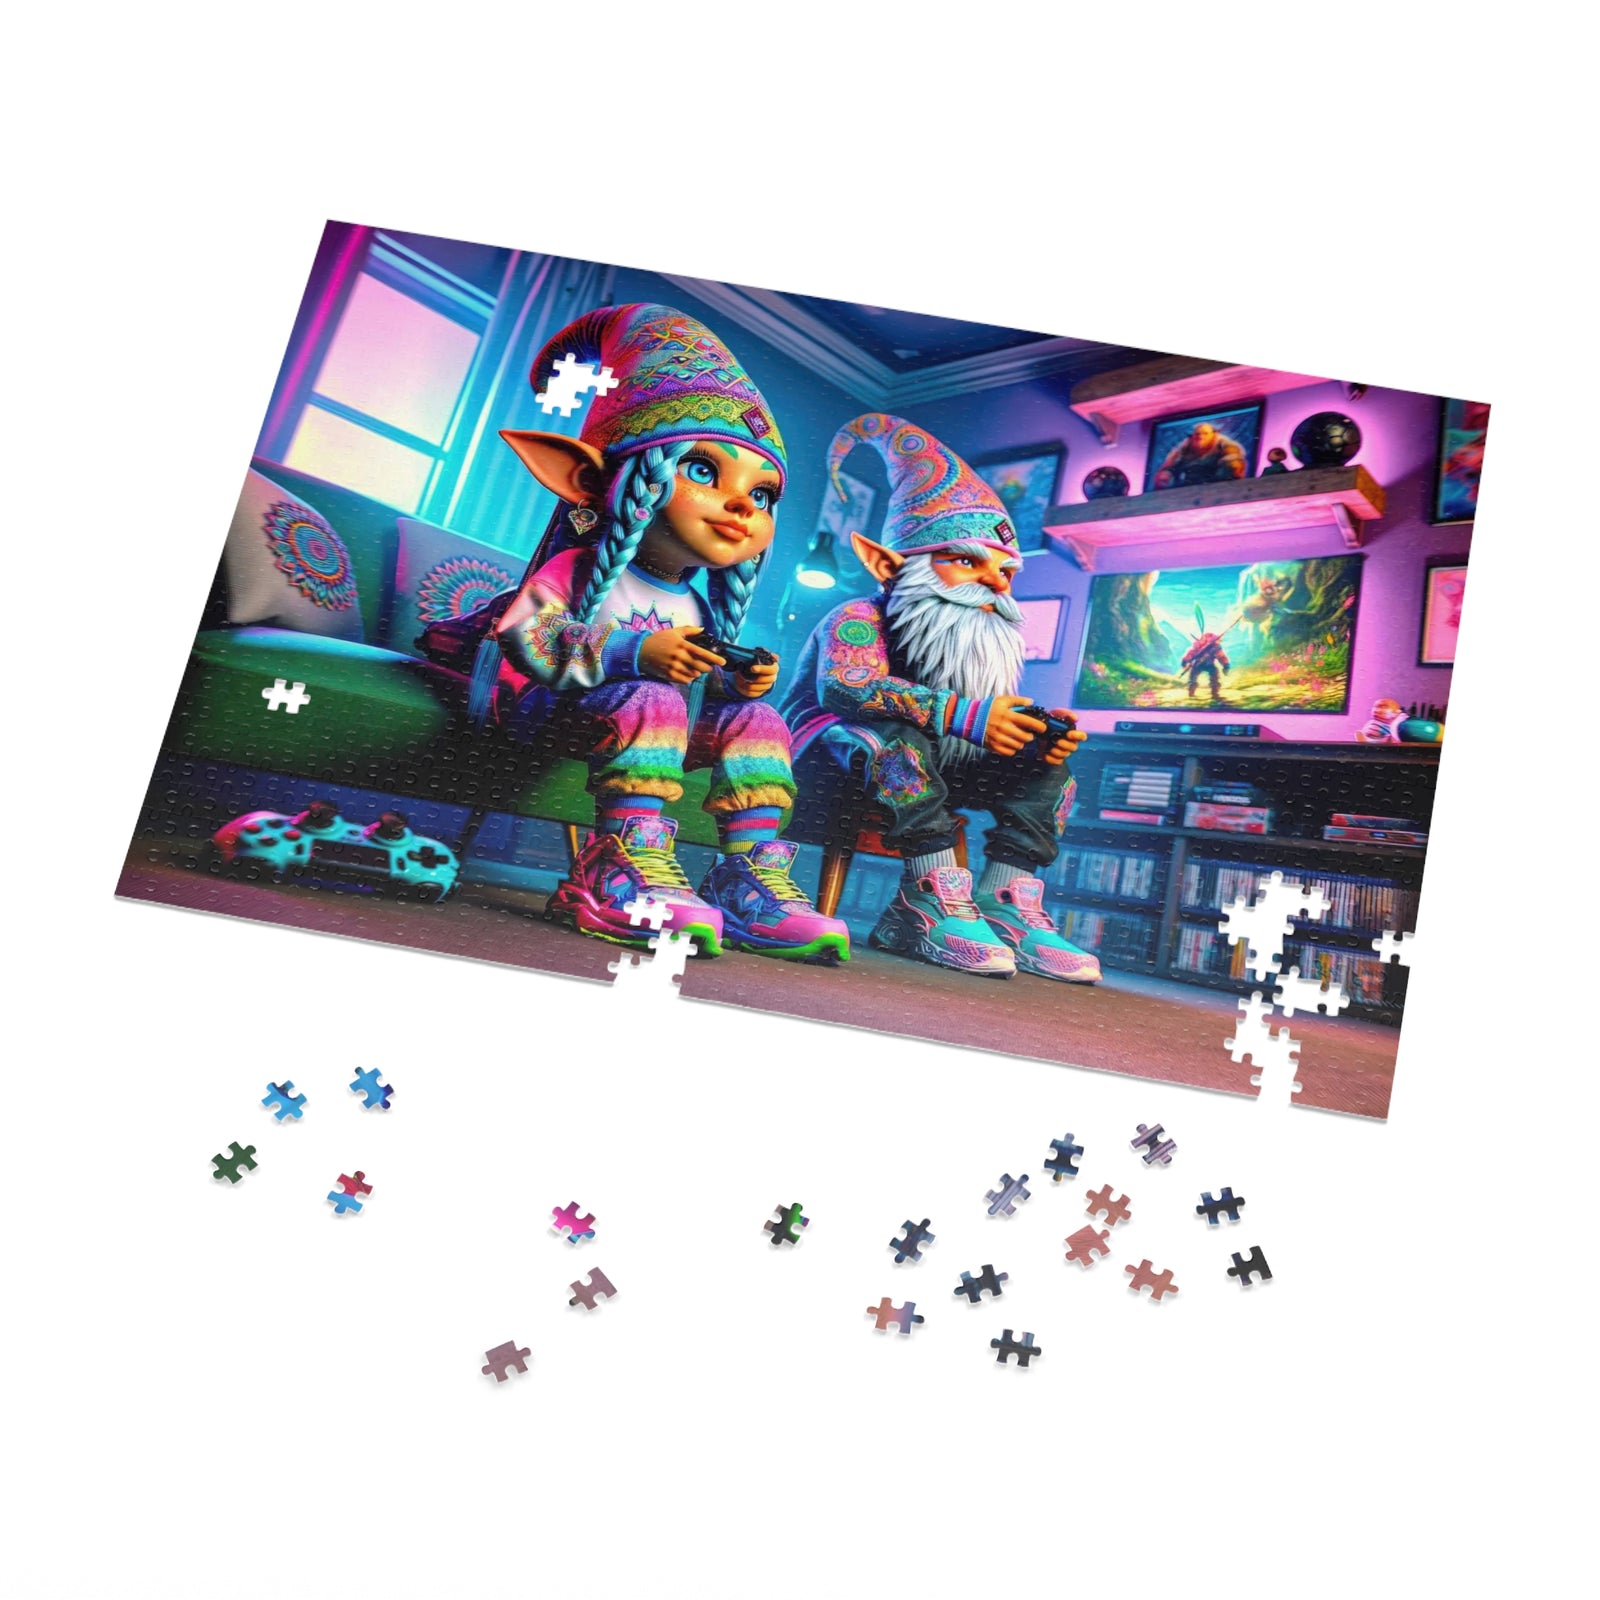 The Gnomish Quest Jigsaw Puzzle